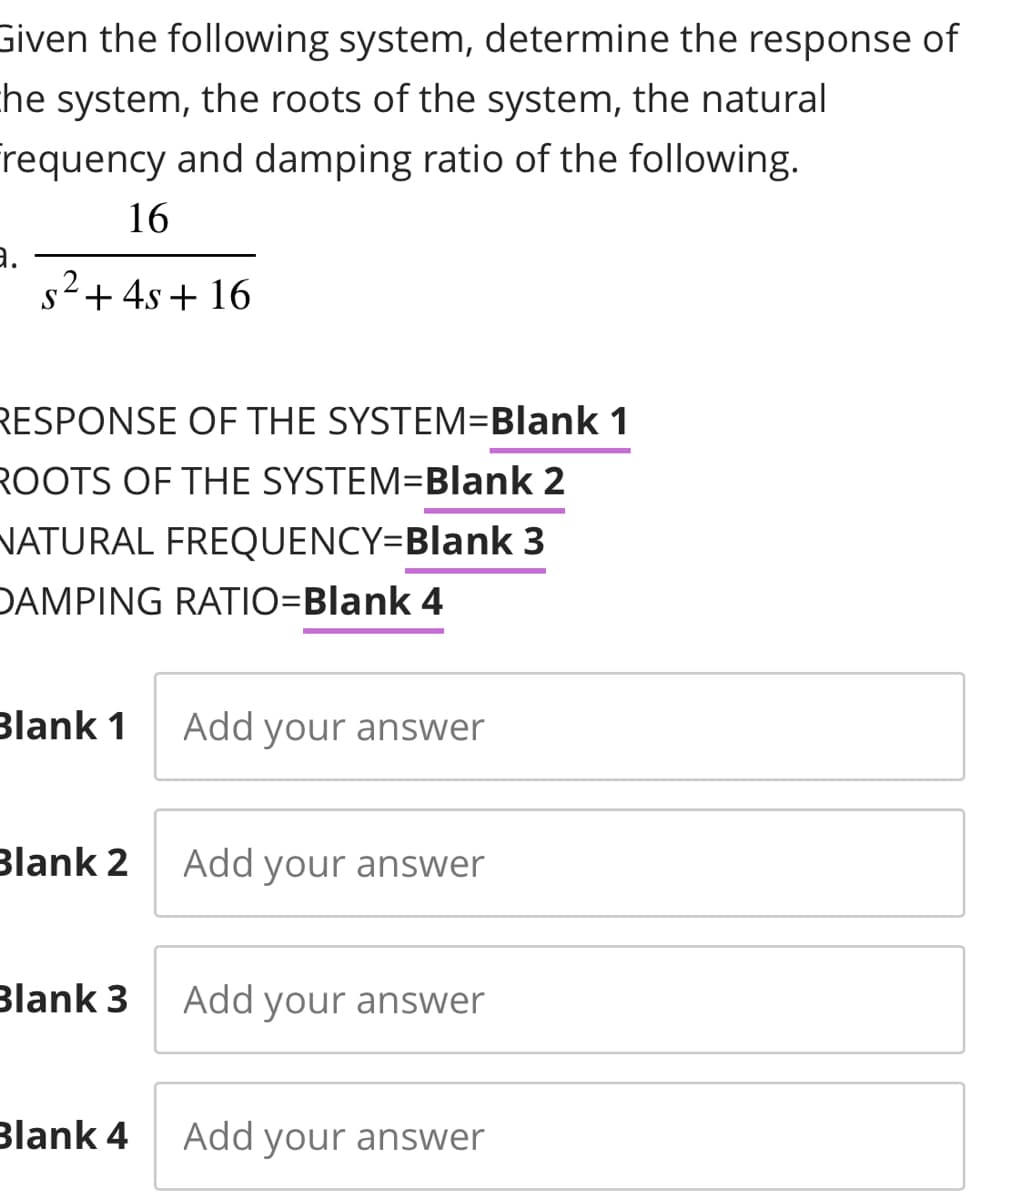 Given the following system, determine the response of
he system, the roots of the system, the natural
Frequency and damping ratio of the following.
16
s²+4s +16
RESPONSE OF THE SYSTEM=Blank 1
ROOTS OF THE SYSTEM=Blank 2
NATURAL FREQUENCY=Blank 3
DAMPING RATIO=Blank 4
Blank 1
Blank 2
Blank 3
Blank 4
Add your answer
Add your answer
Add your answer
Add your answer